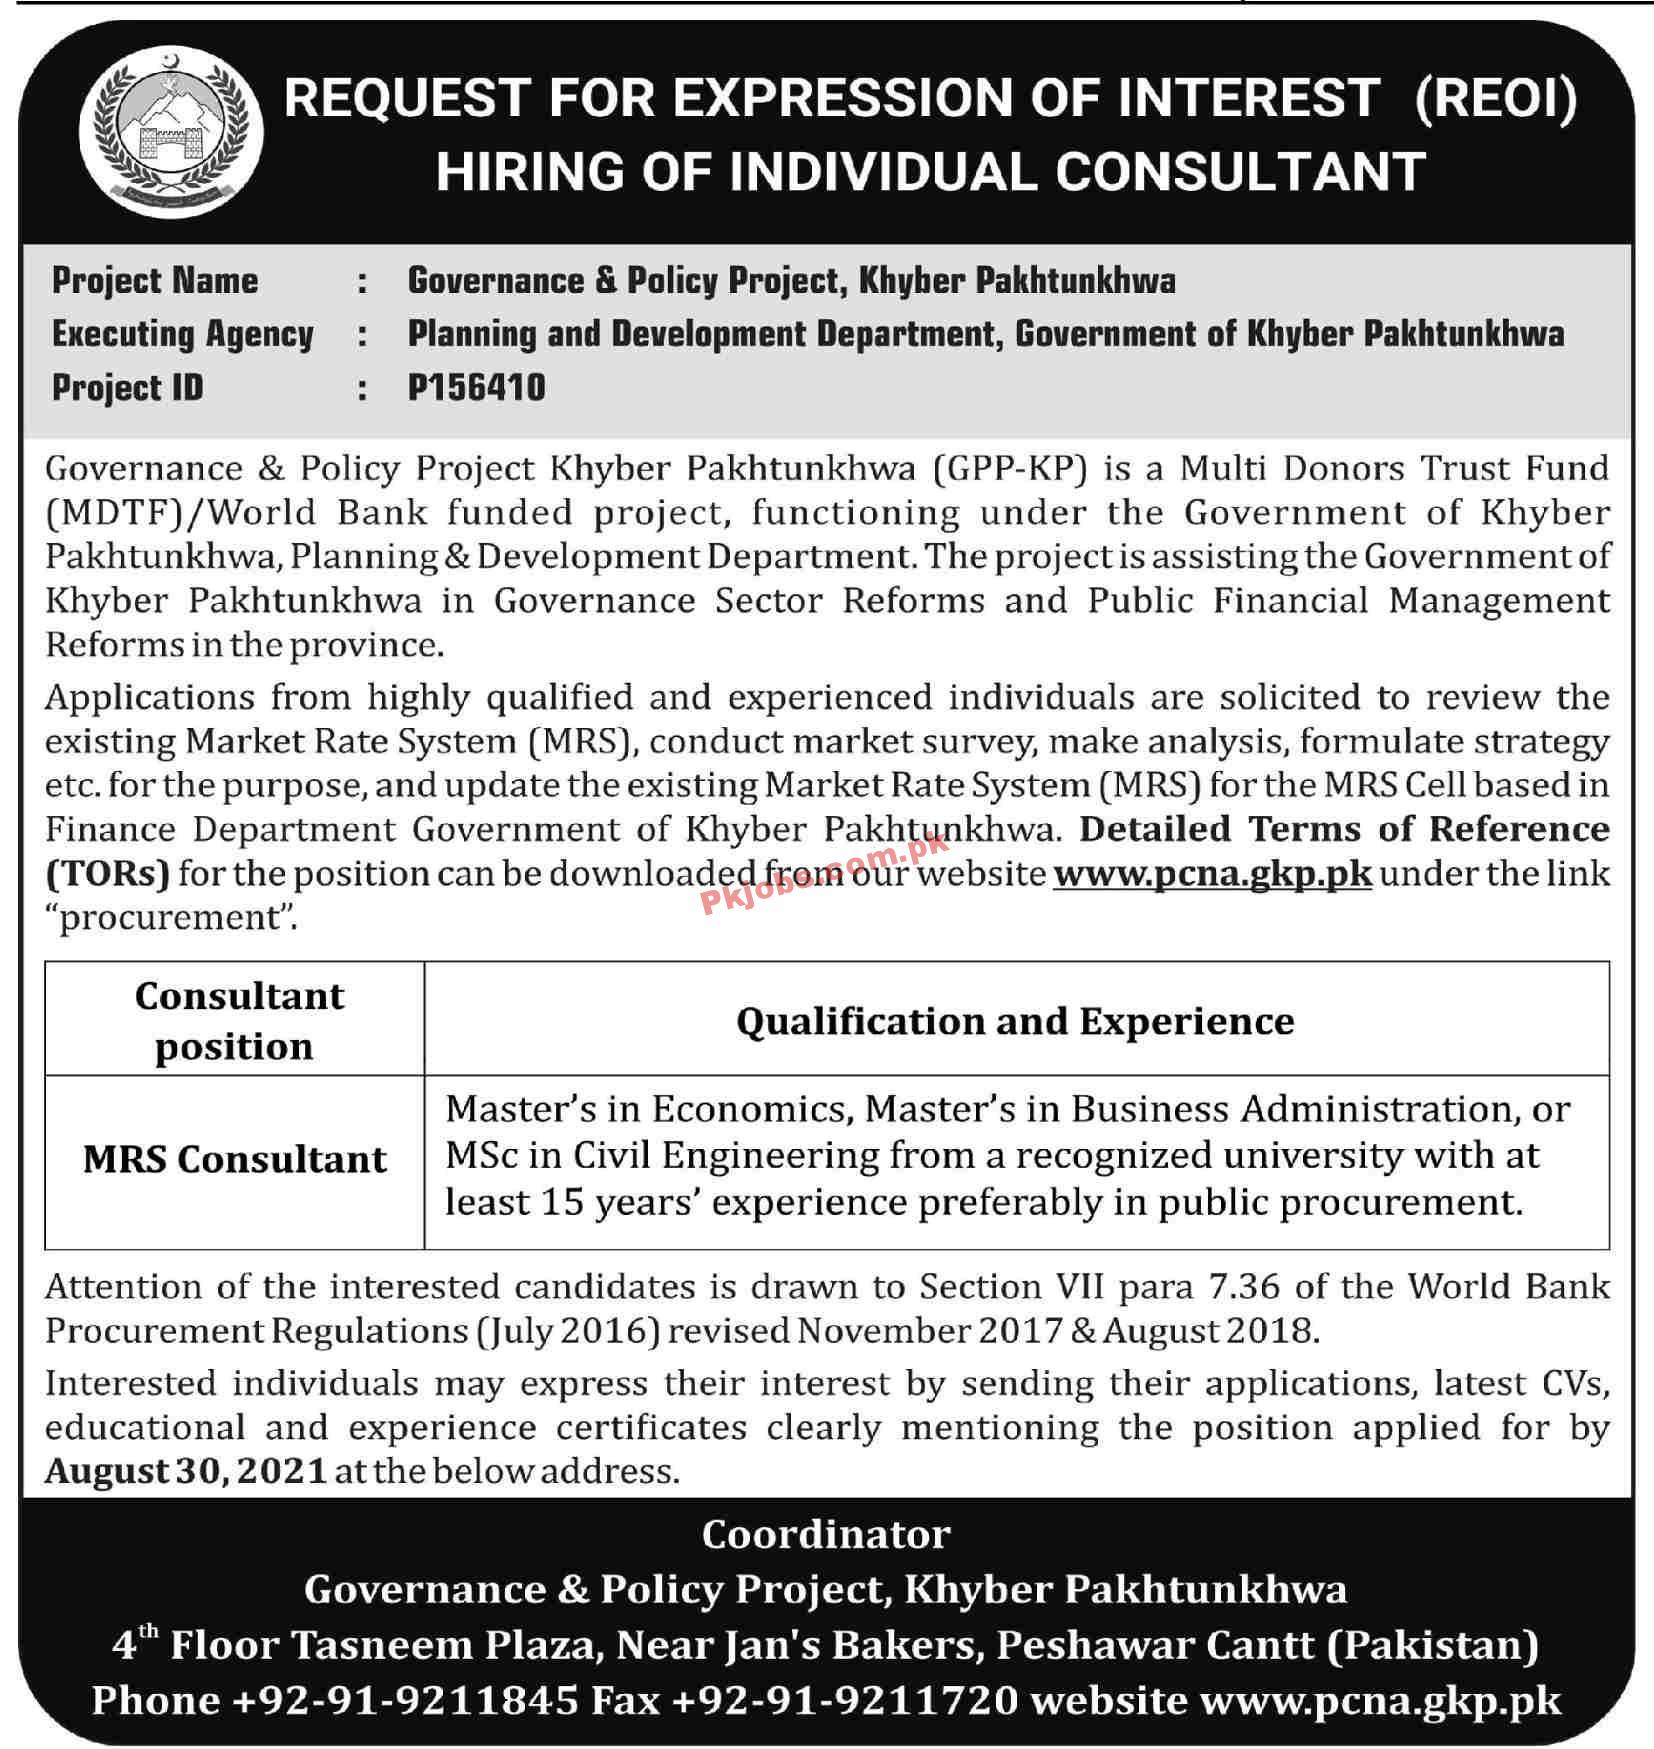 Jobs in Governance & Policy Project Khyber Pakhtunkhwa